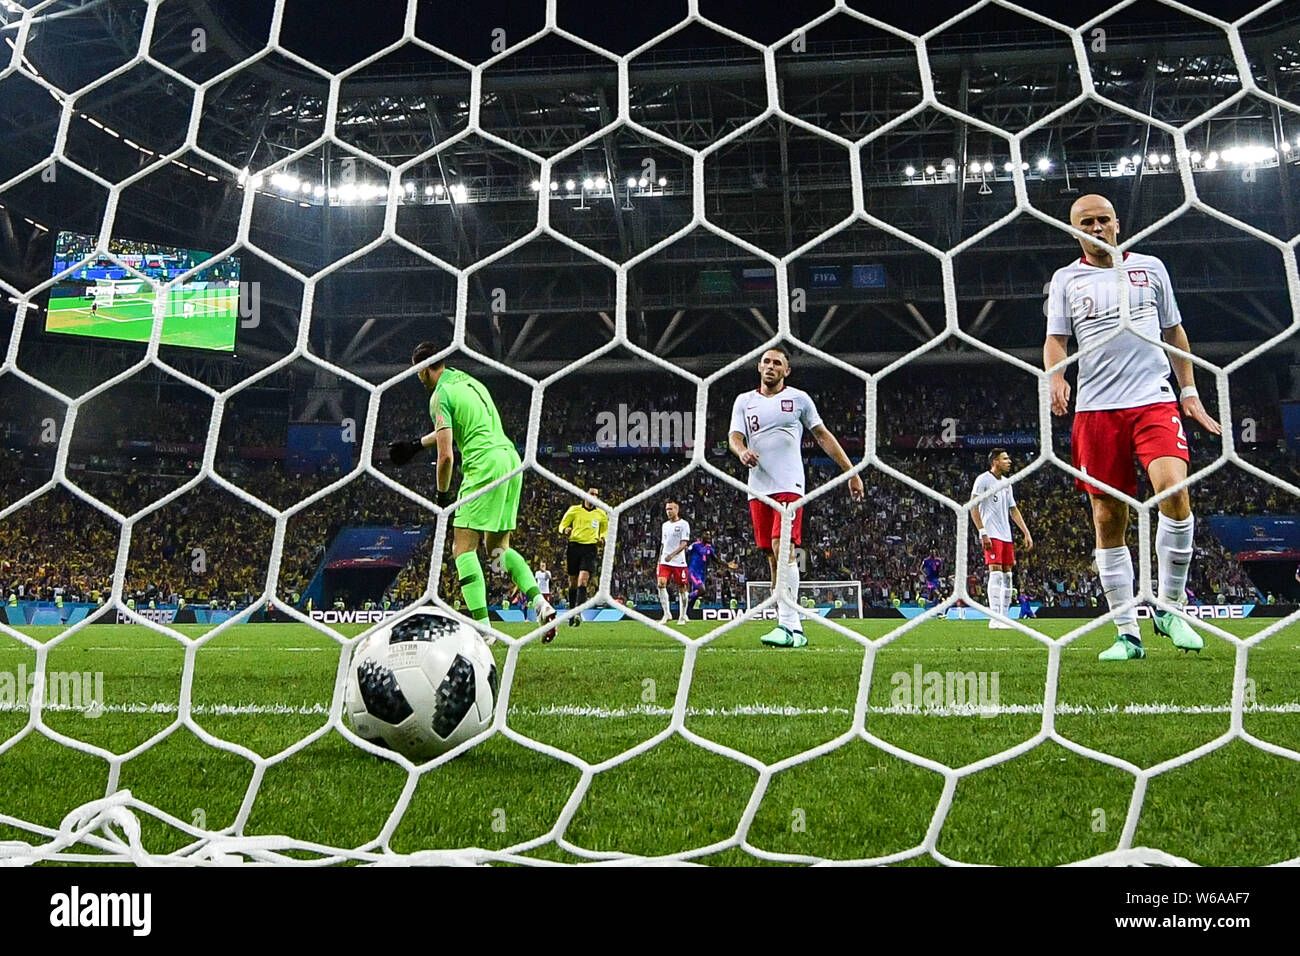 (From left) Goalkeeper Wojciech Szczesny, Maciej Rybus and Michal Pazdan of Poland react after Juan Cuadrado of Colombia scored a goal in their Group Stock Photo